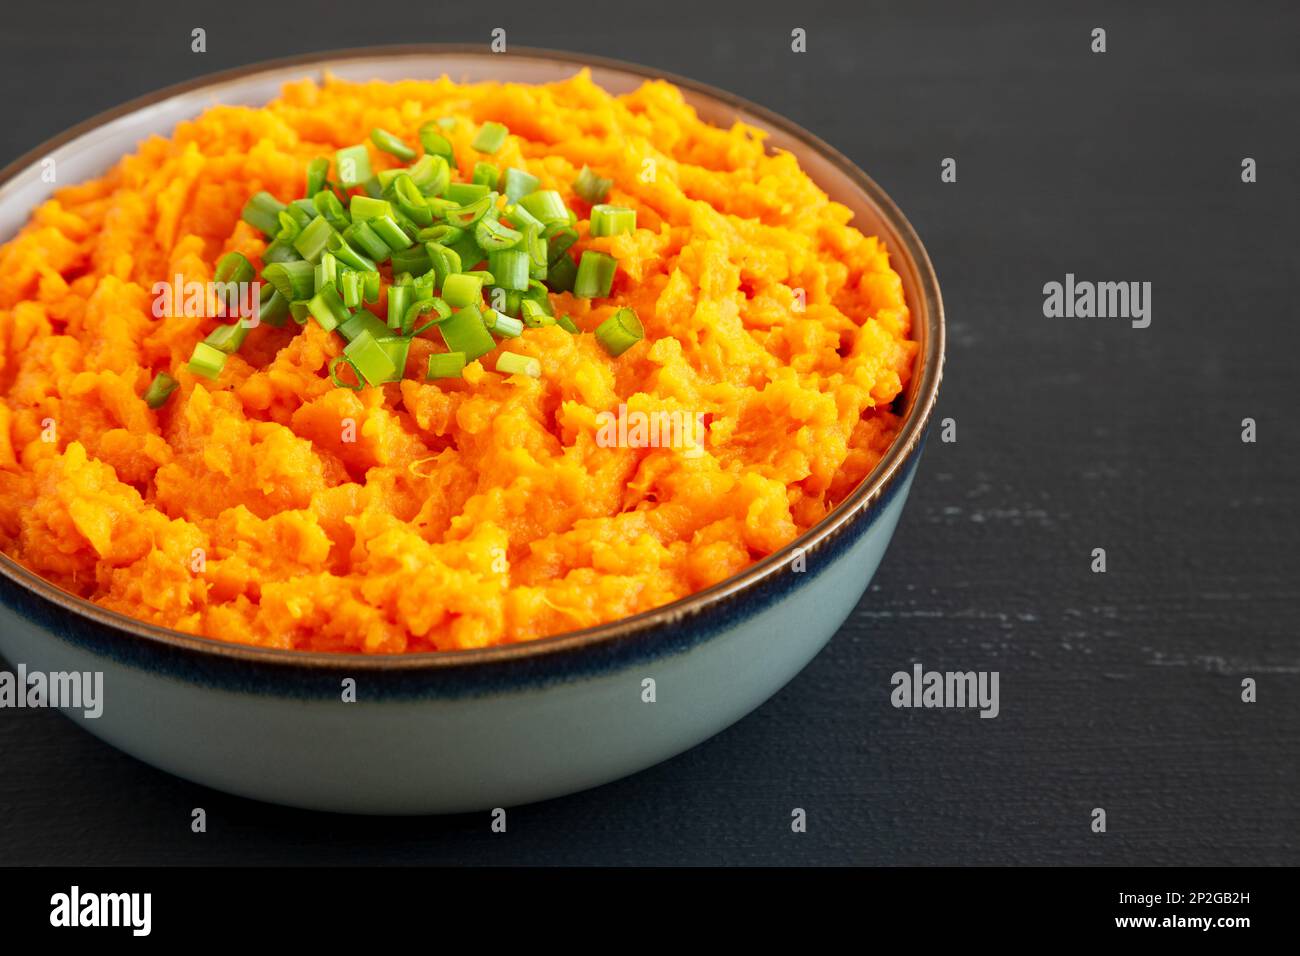 Homemade Creamy Mashed Sweet Potatoes with MIlk and Butter in a Bowl, side view. Copy space. Stock Photo